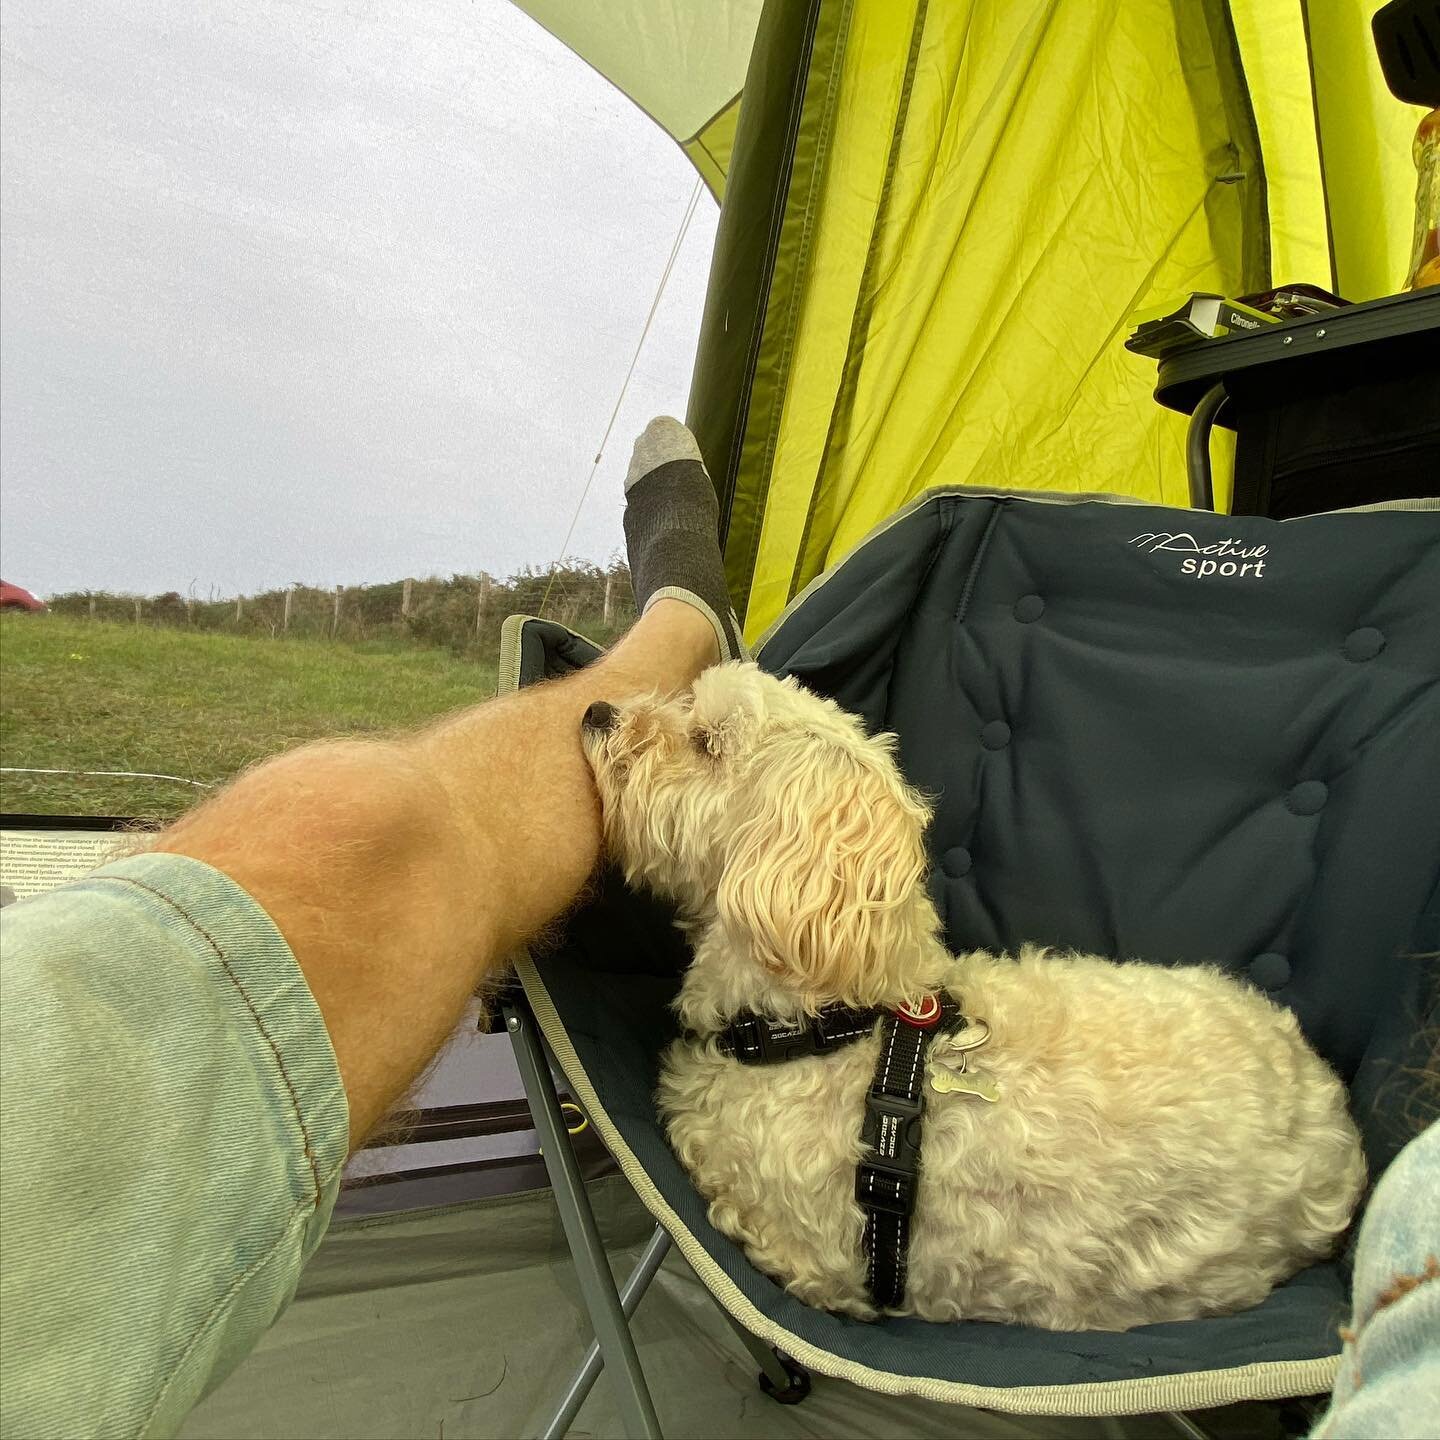 While we were away, camping in West Wales last weekend, Stanley fell asleep with his snoot balanced on my shin. &lsquo;&lsquo;Twas most adorable 😍 

#chrisrankin #percyweasley #weasley #hogwarts #harrypotter #houseofchrisness #thatgingerbloke #campi